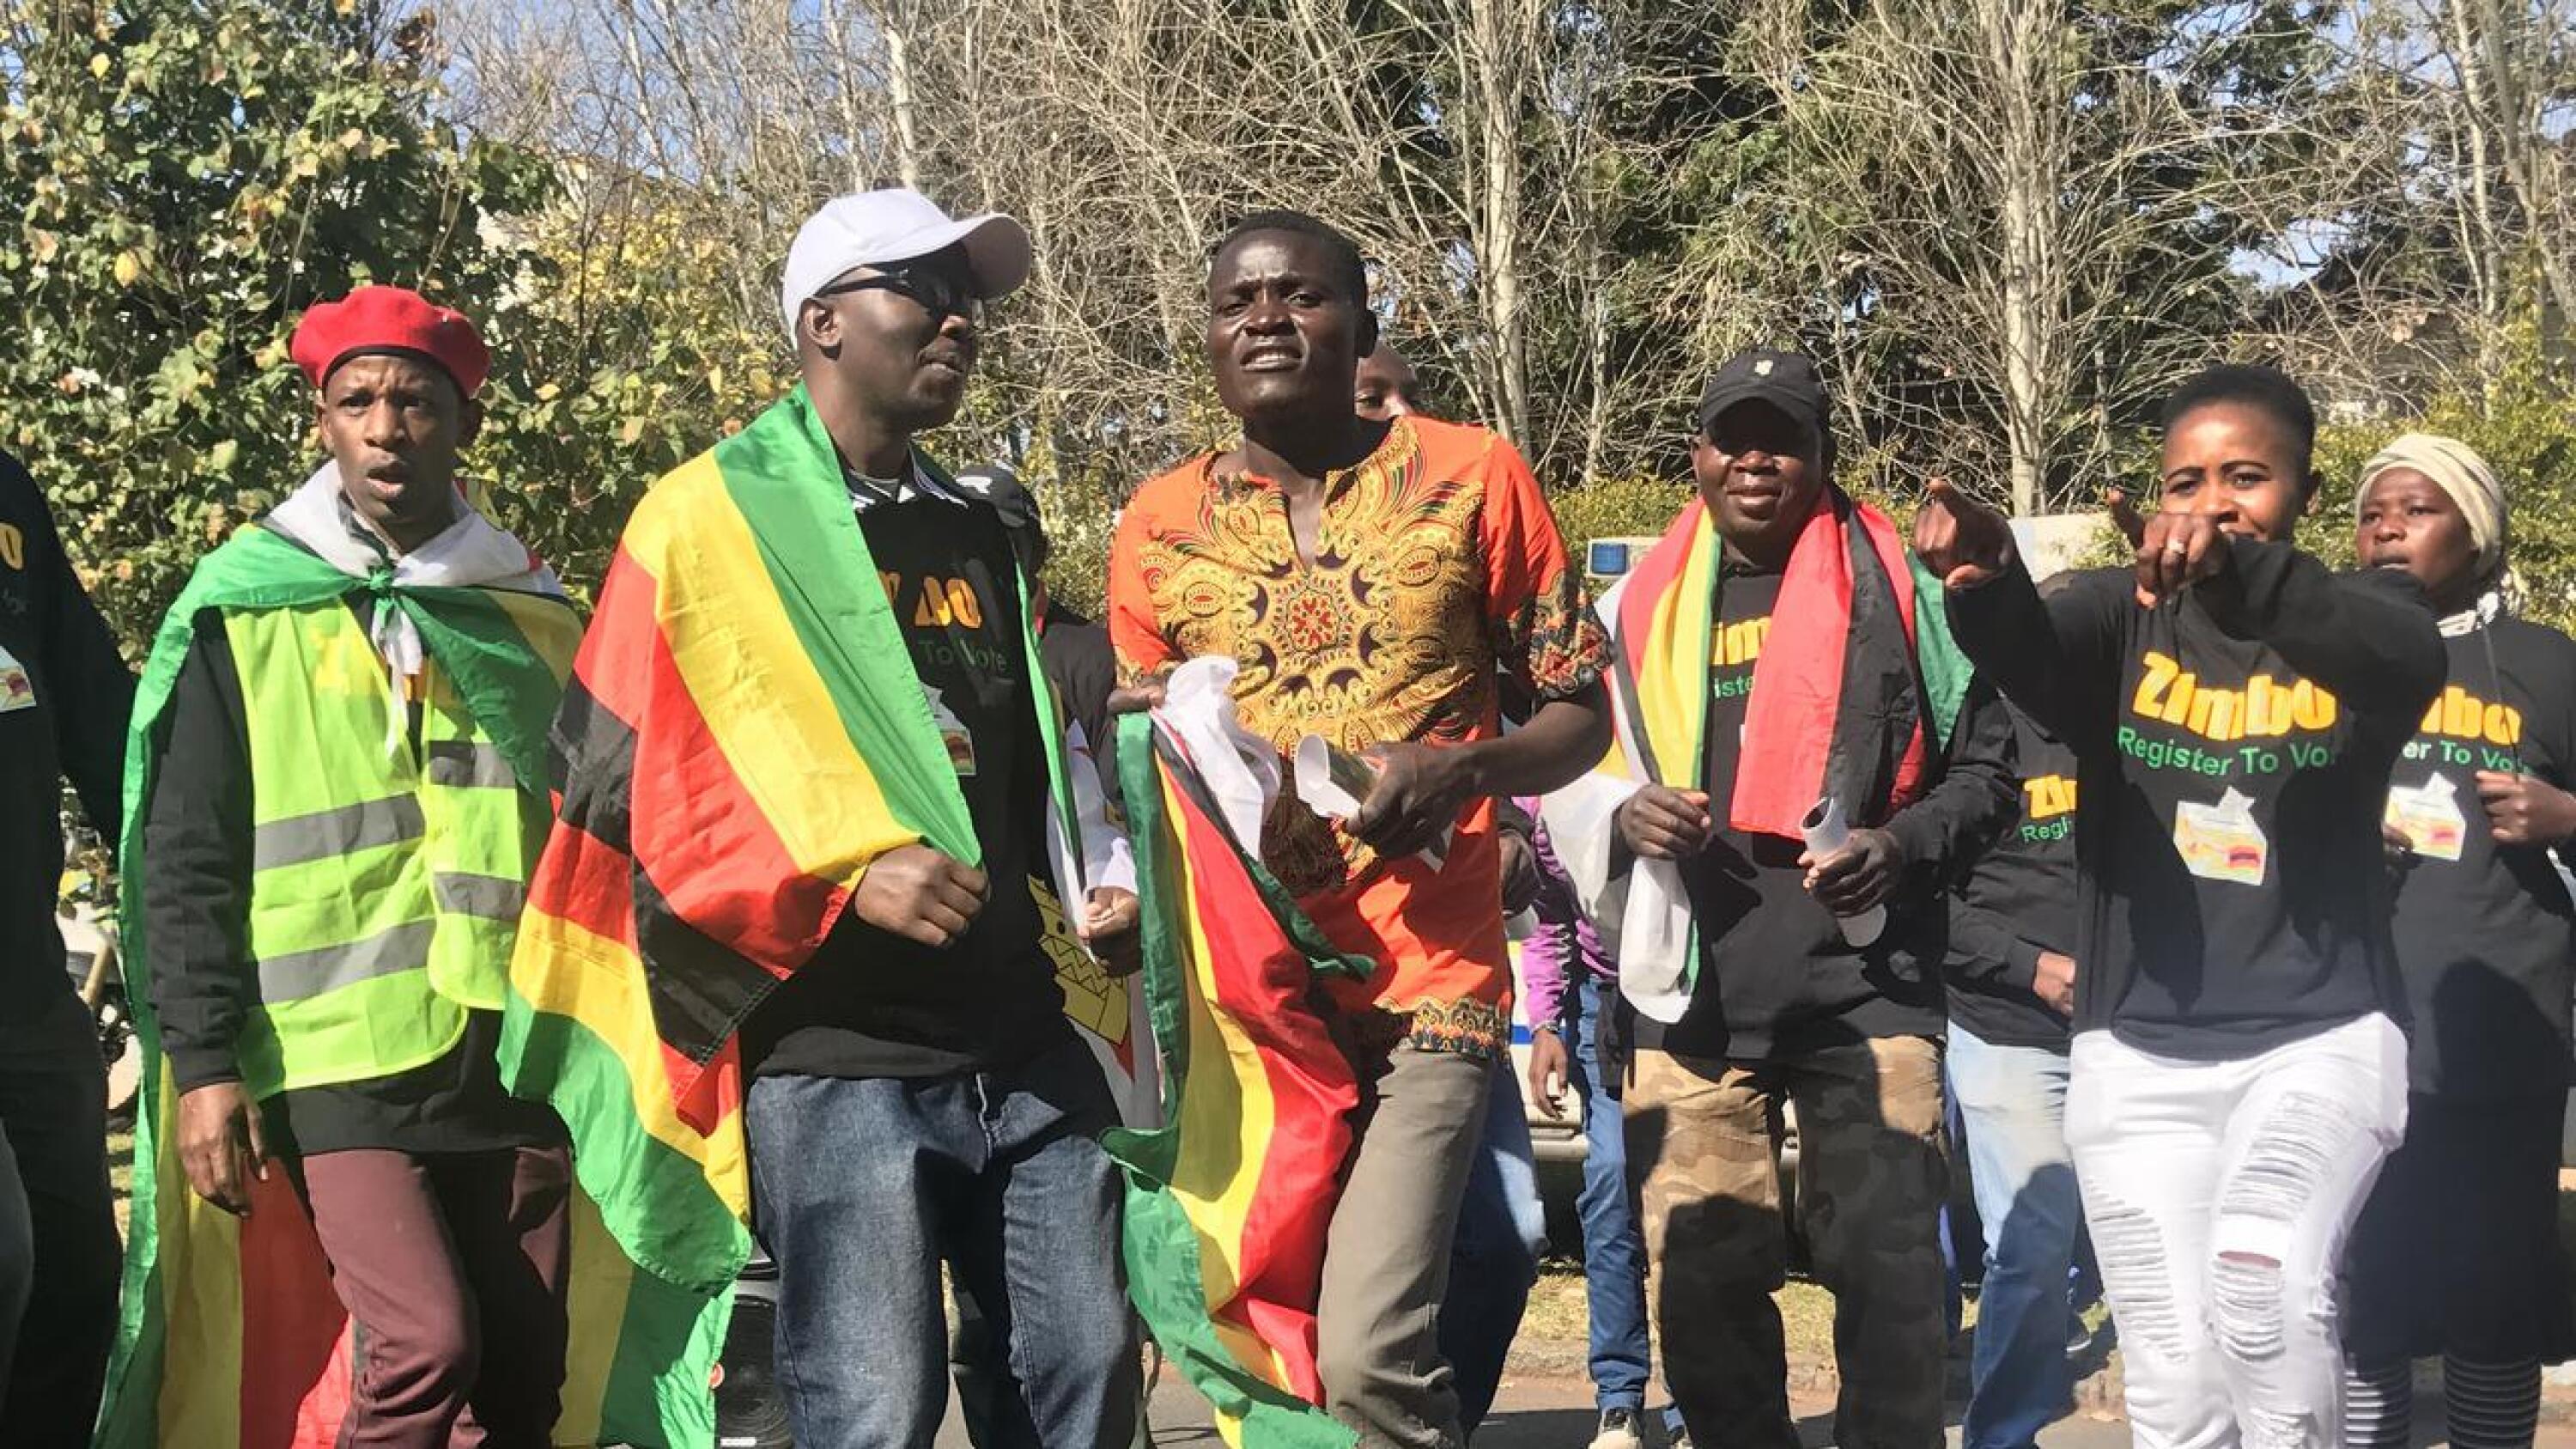 A group of people marching with Zim flags